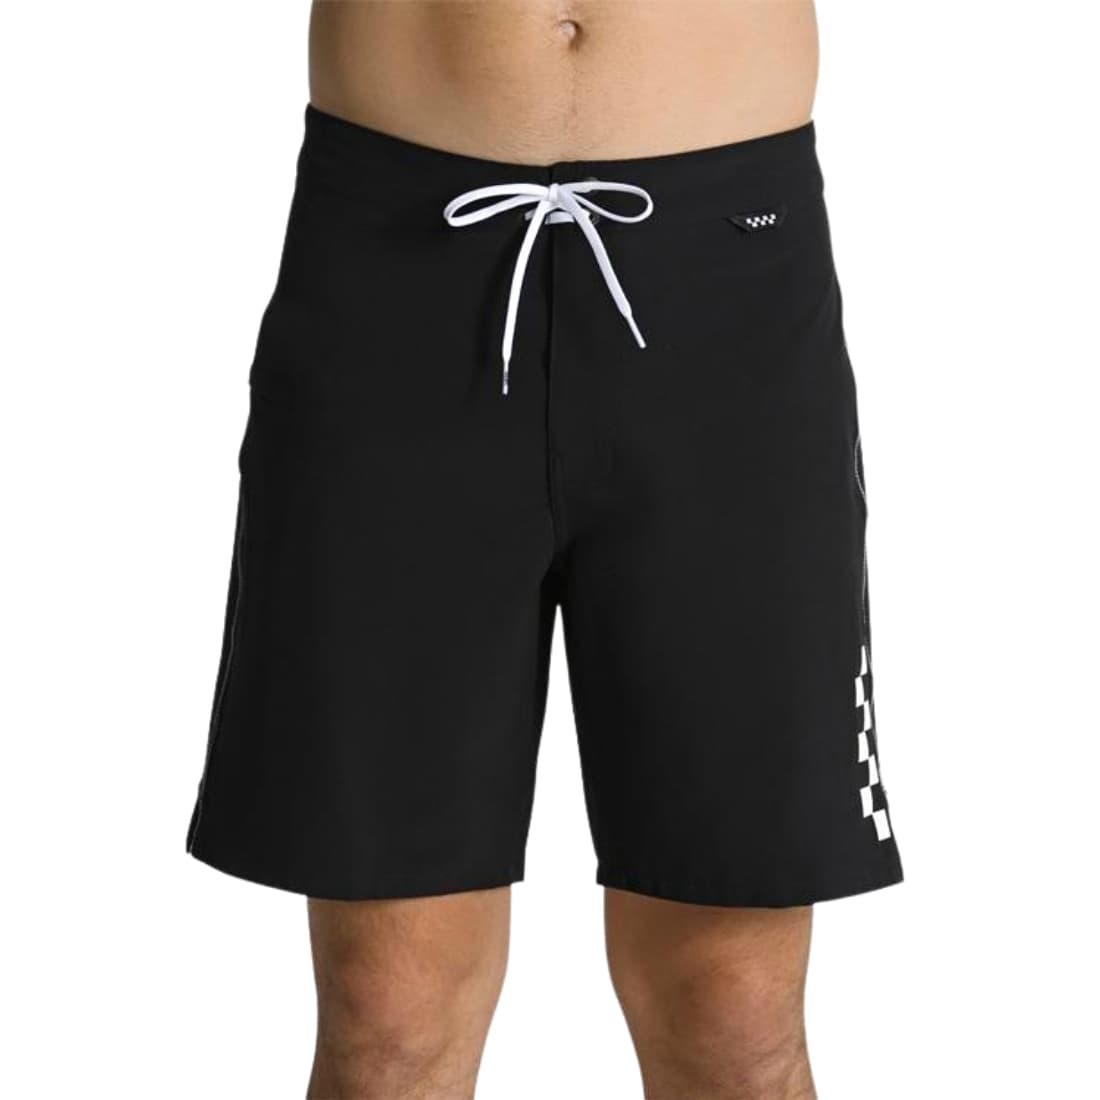 Vans The Daily Solid Boardshorts - Black - Mens Boardshorts by Vans